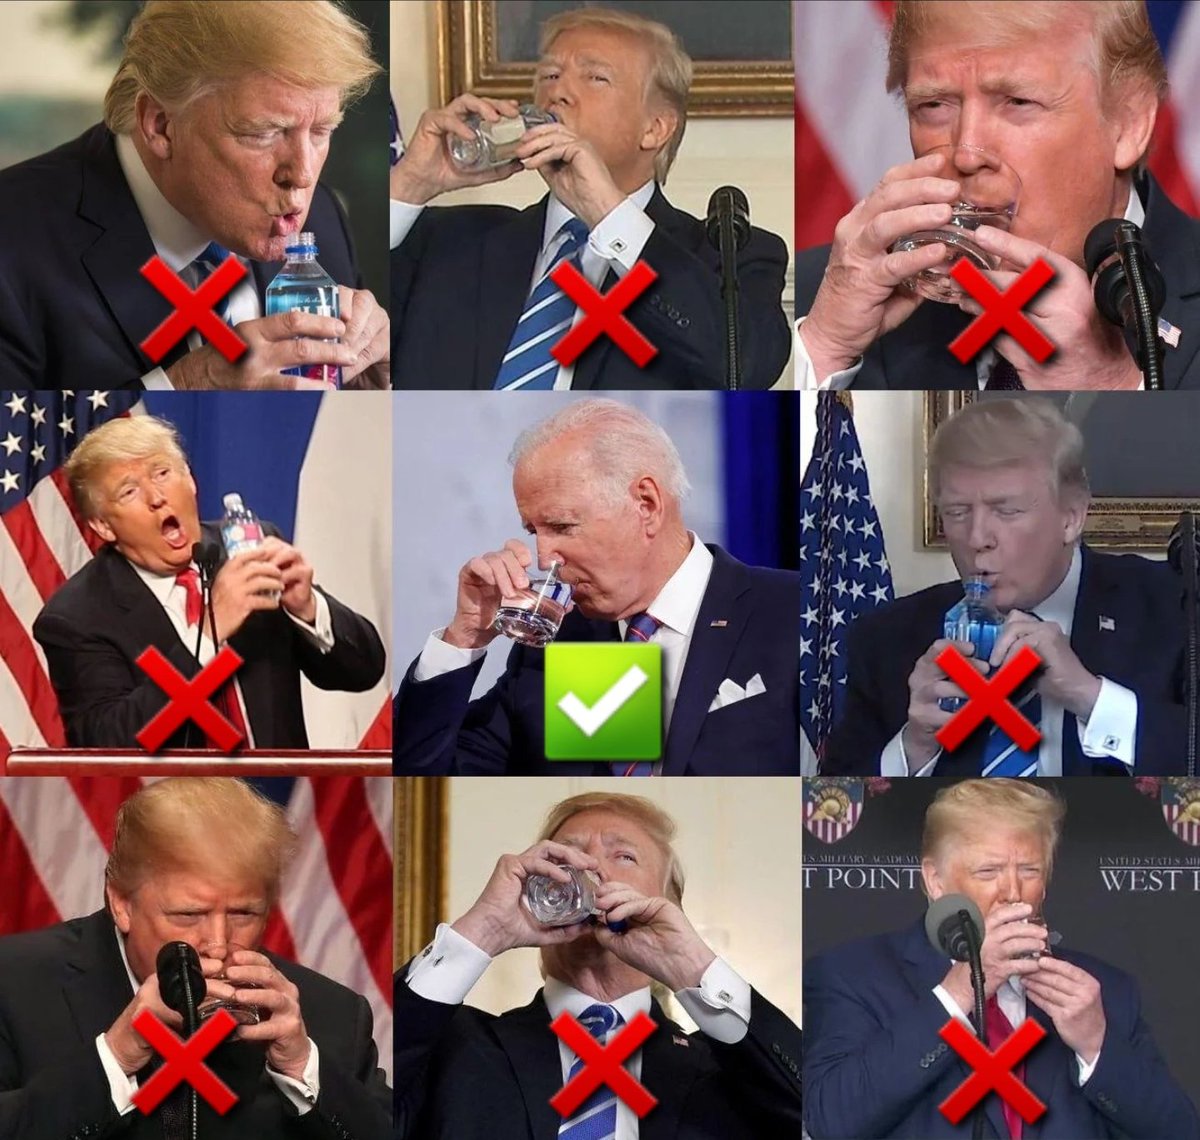 I like presidents without stubby fingers who can drink with just one hand. 😂